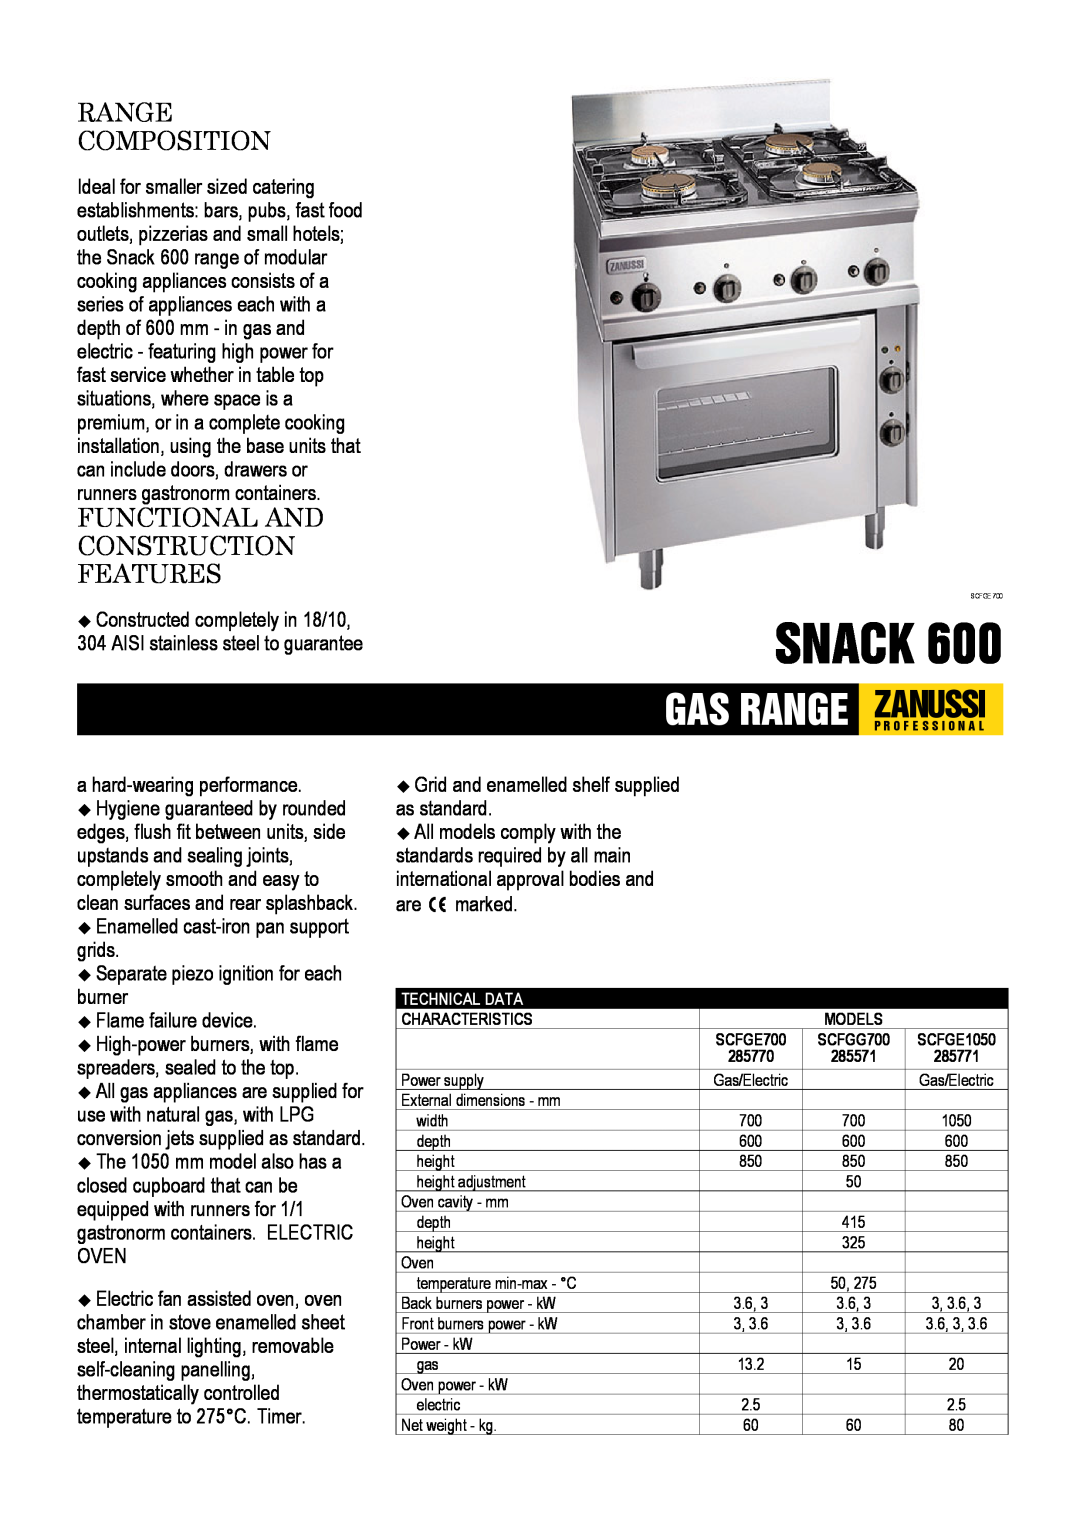 Zanussi SCFGE 700 dimensions Snack, Range Composition, Functional And Construction Features, a hard-wearingperformance 